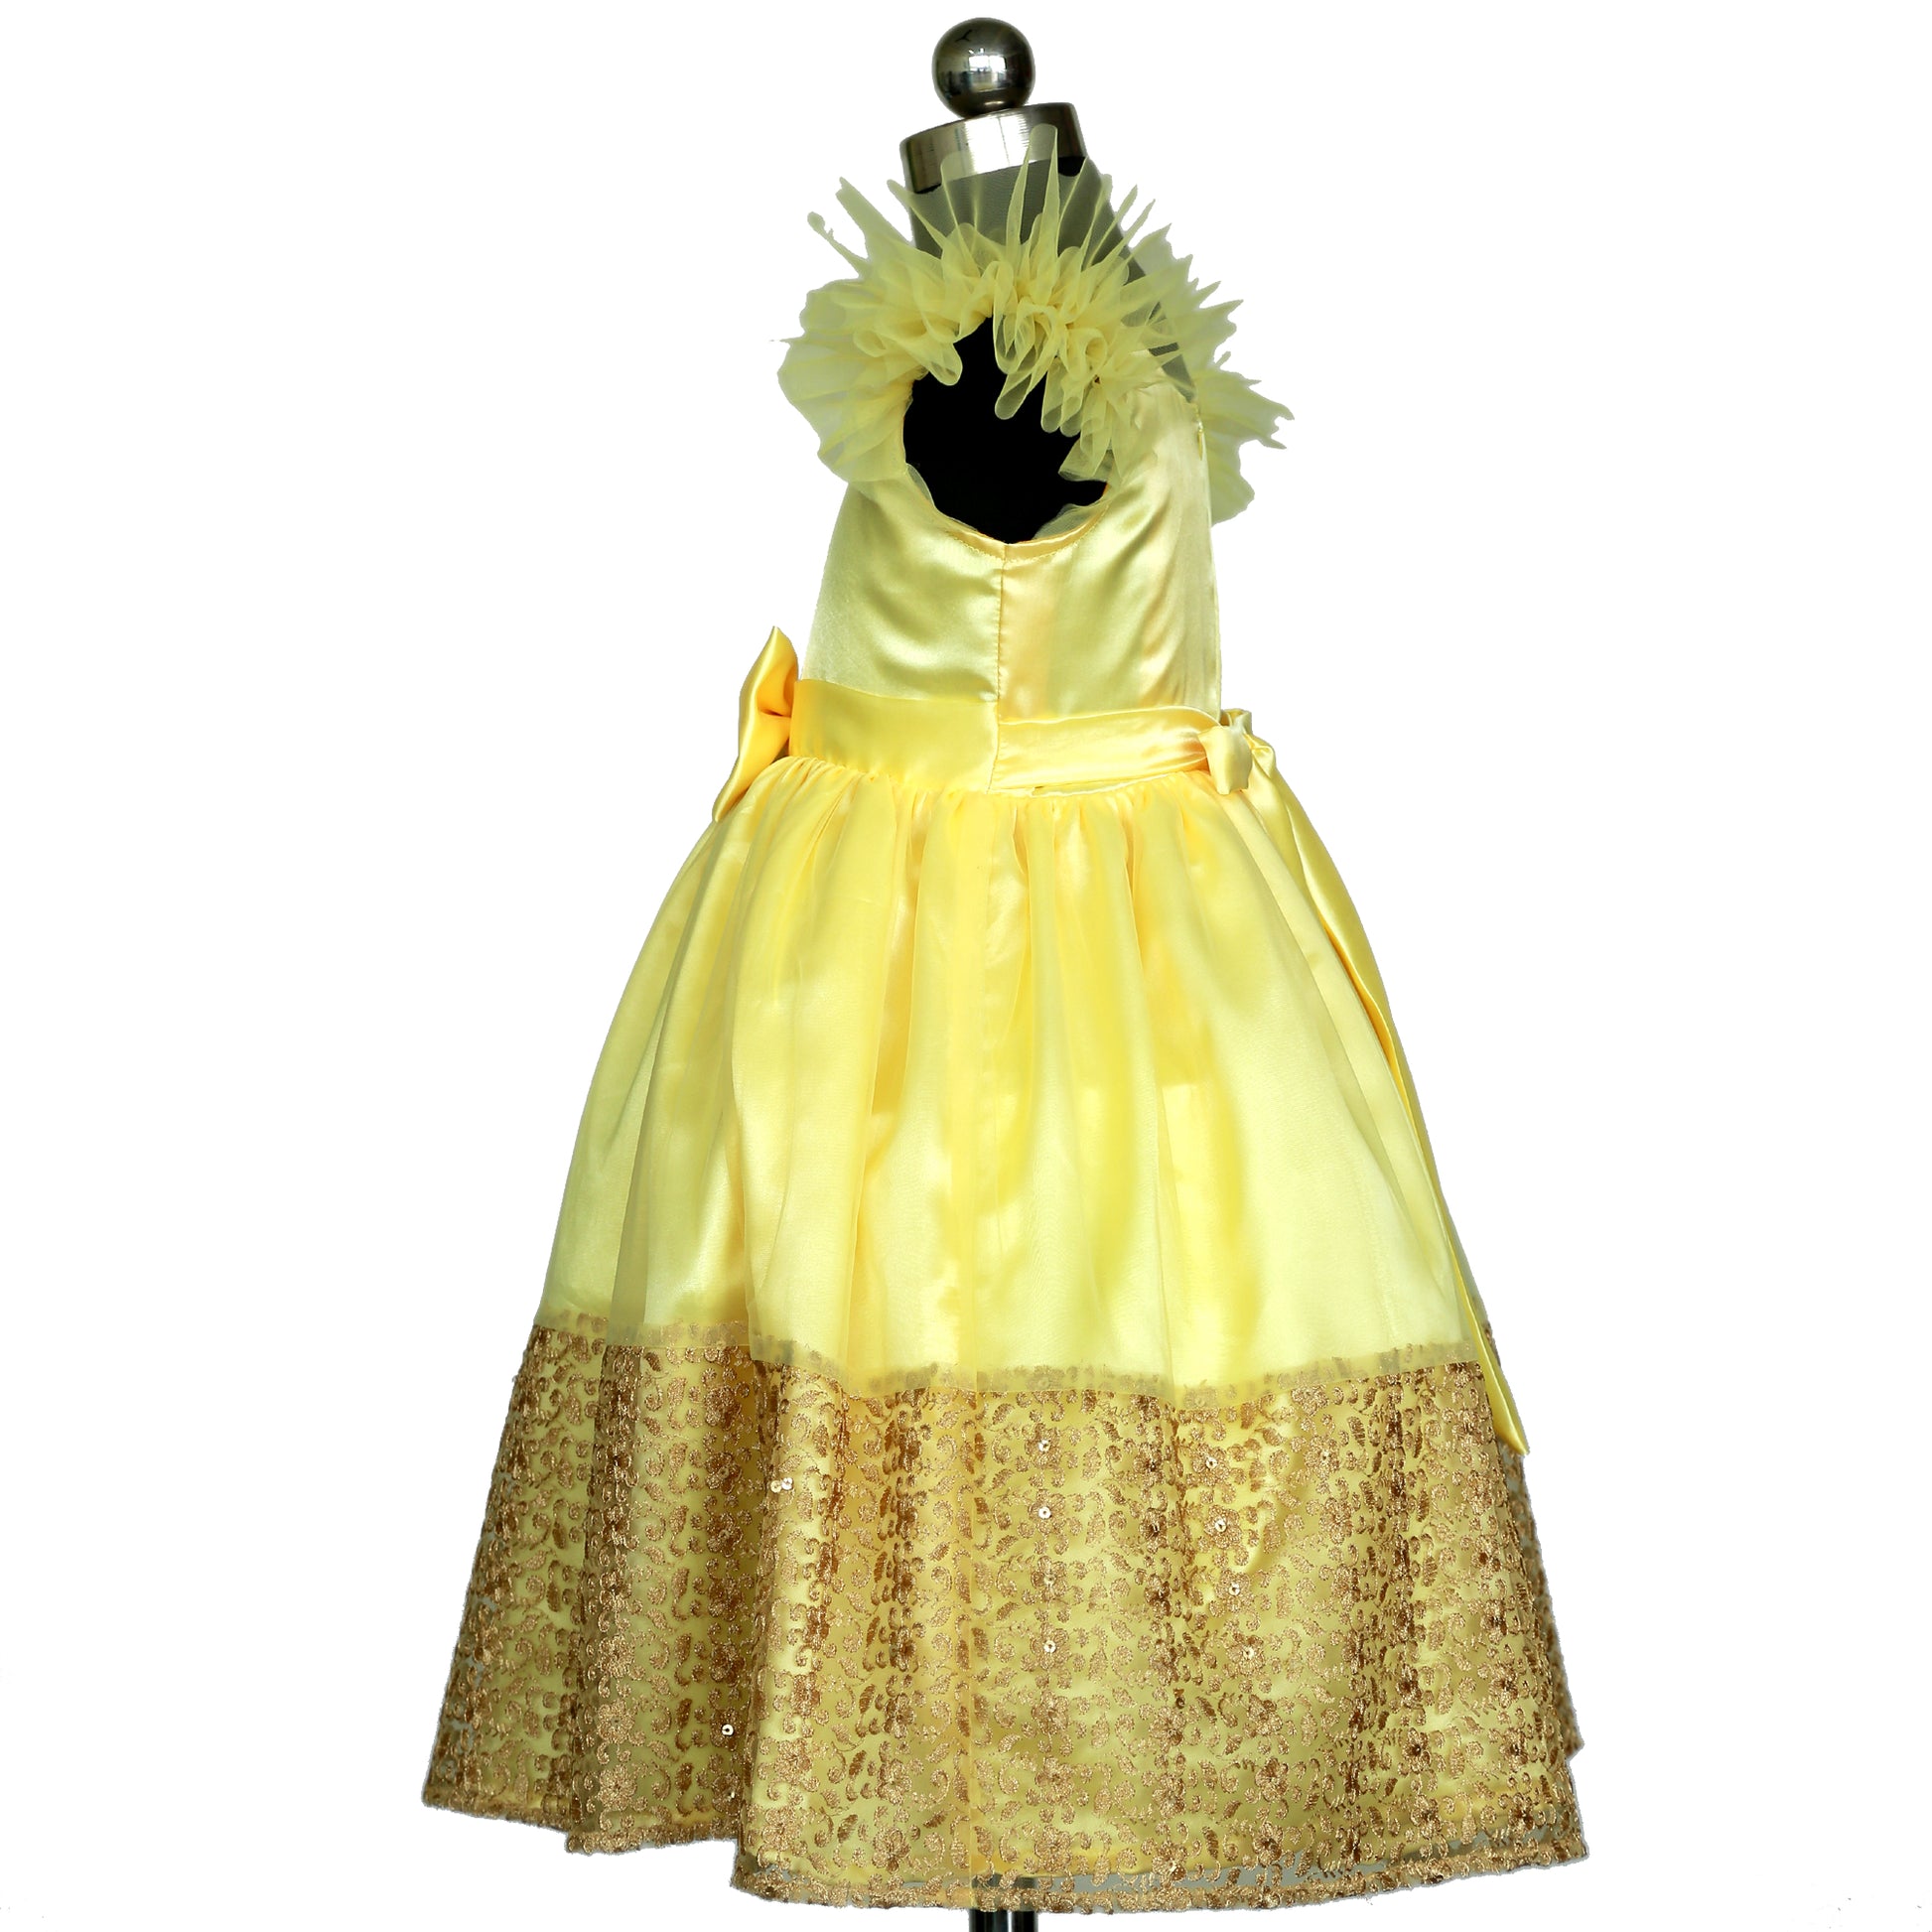 heykidoo unique designer frock party dress for small girls